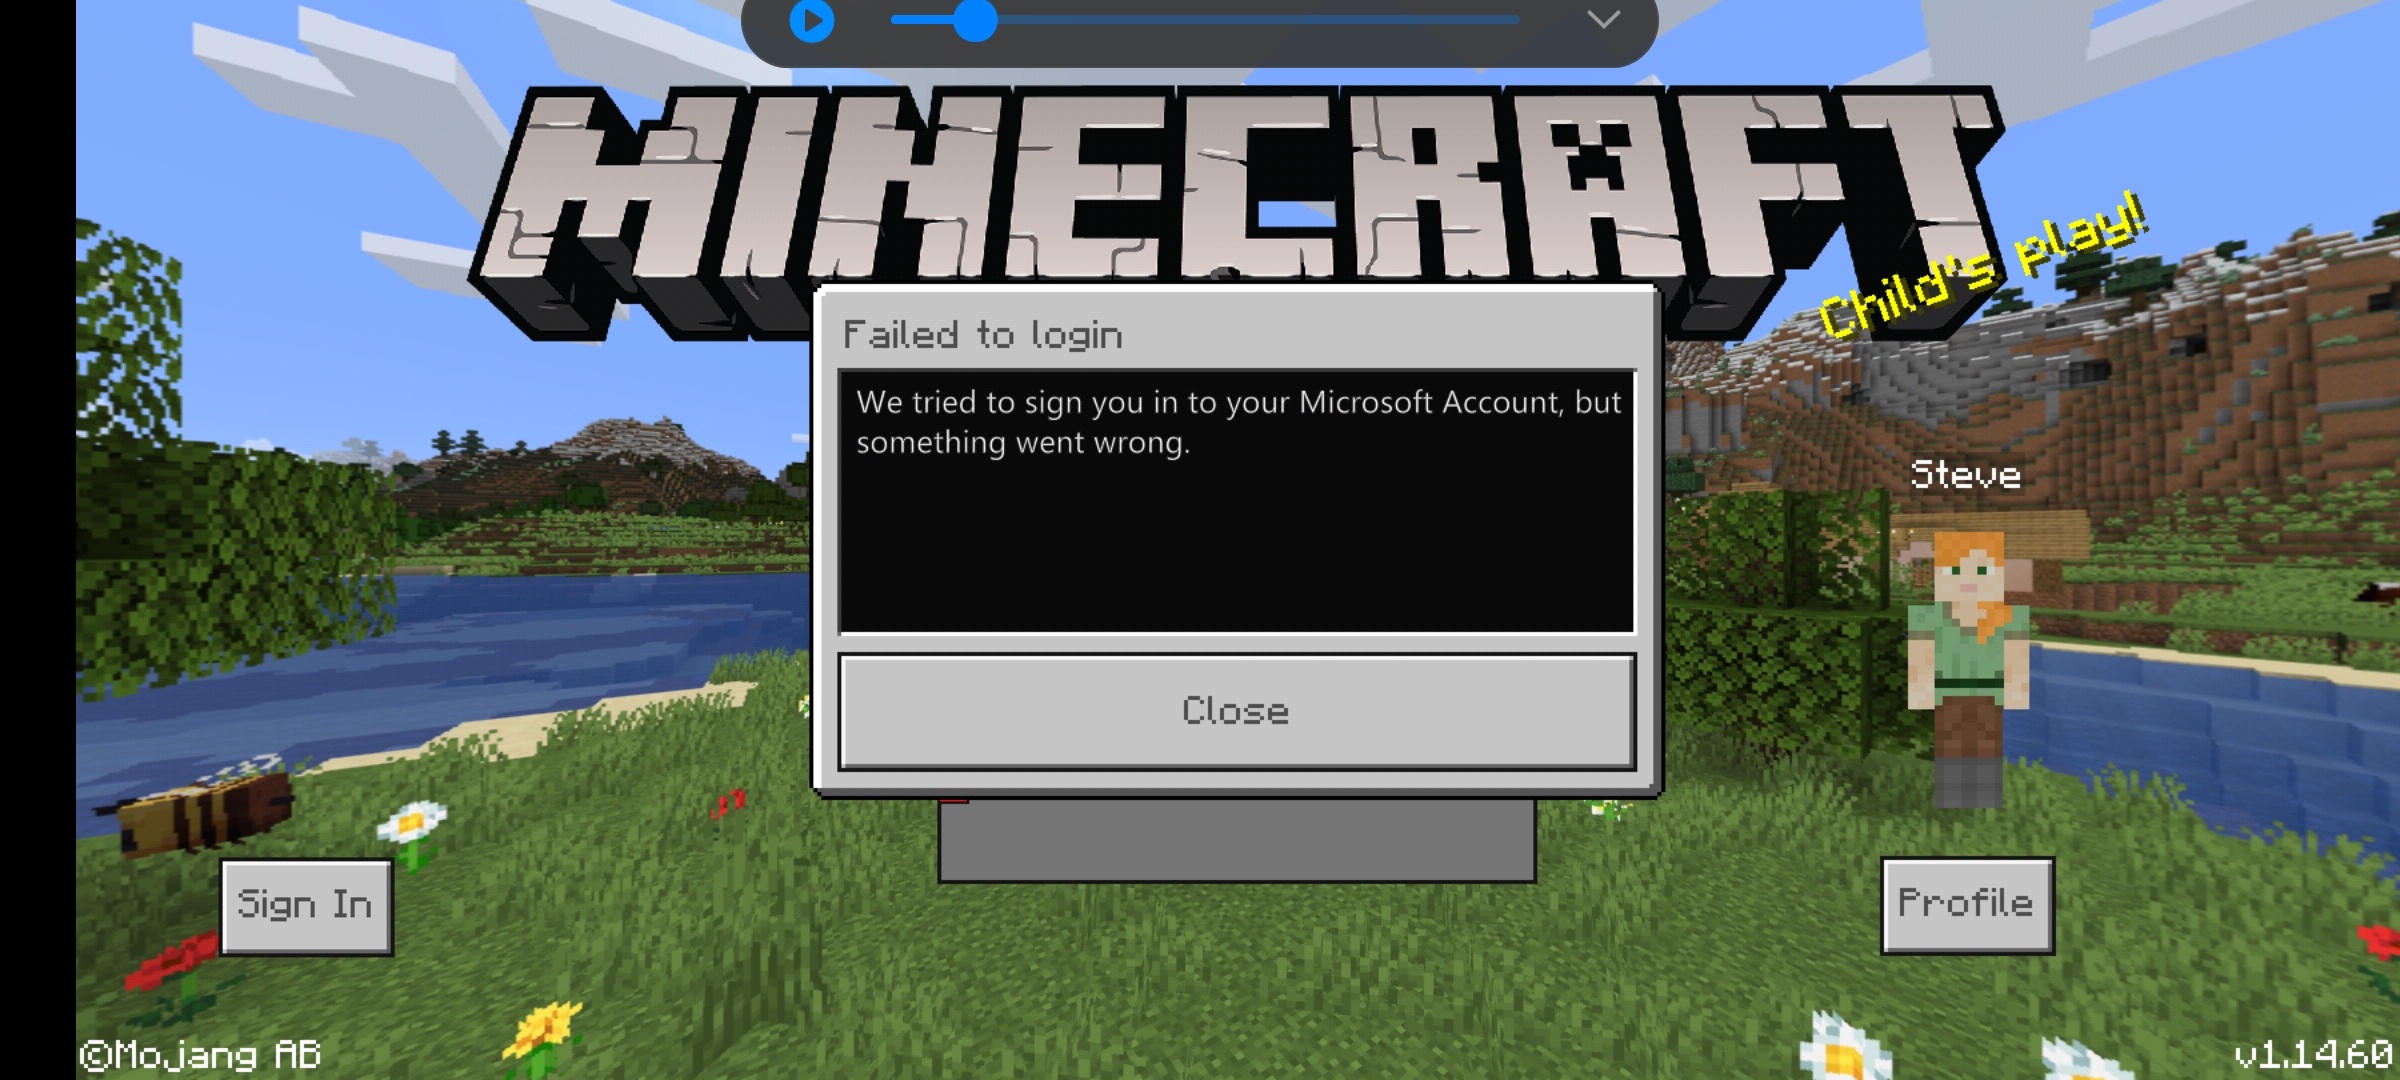 I can't sign in to Minecraft on my phone, it says log in